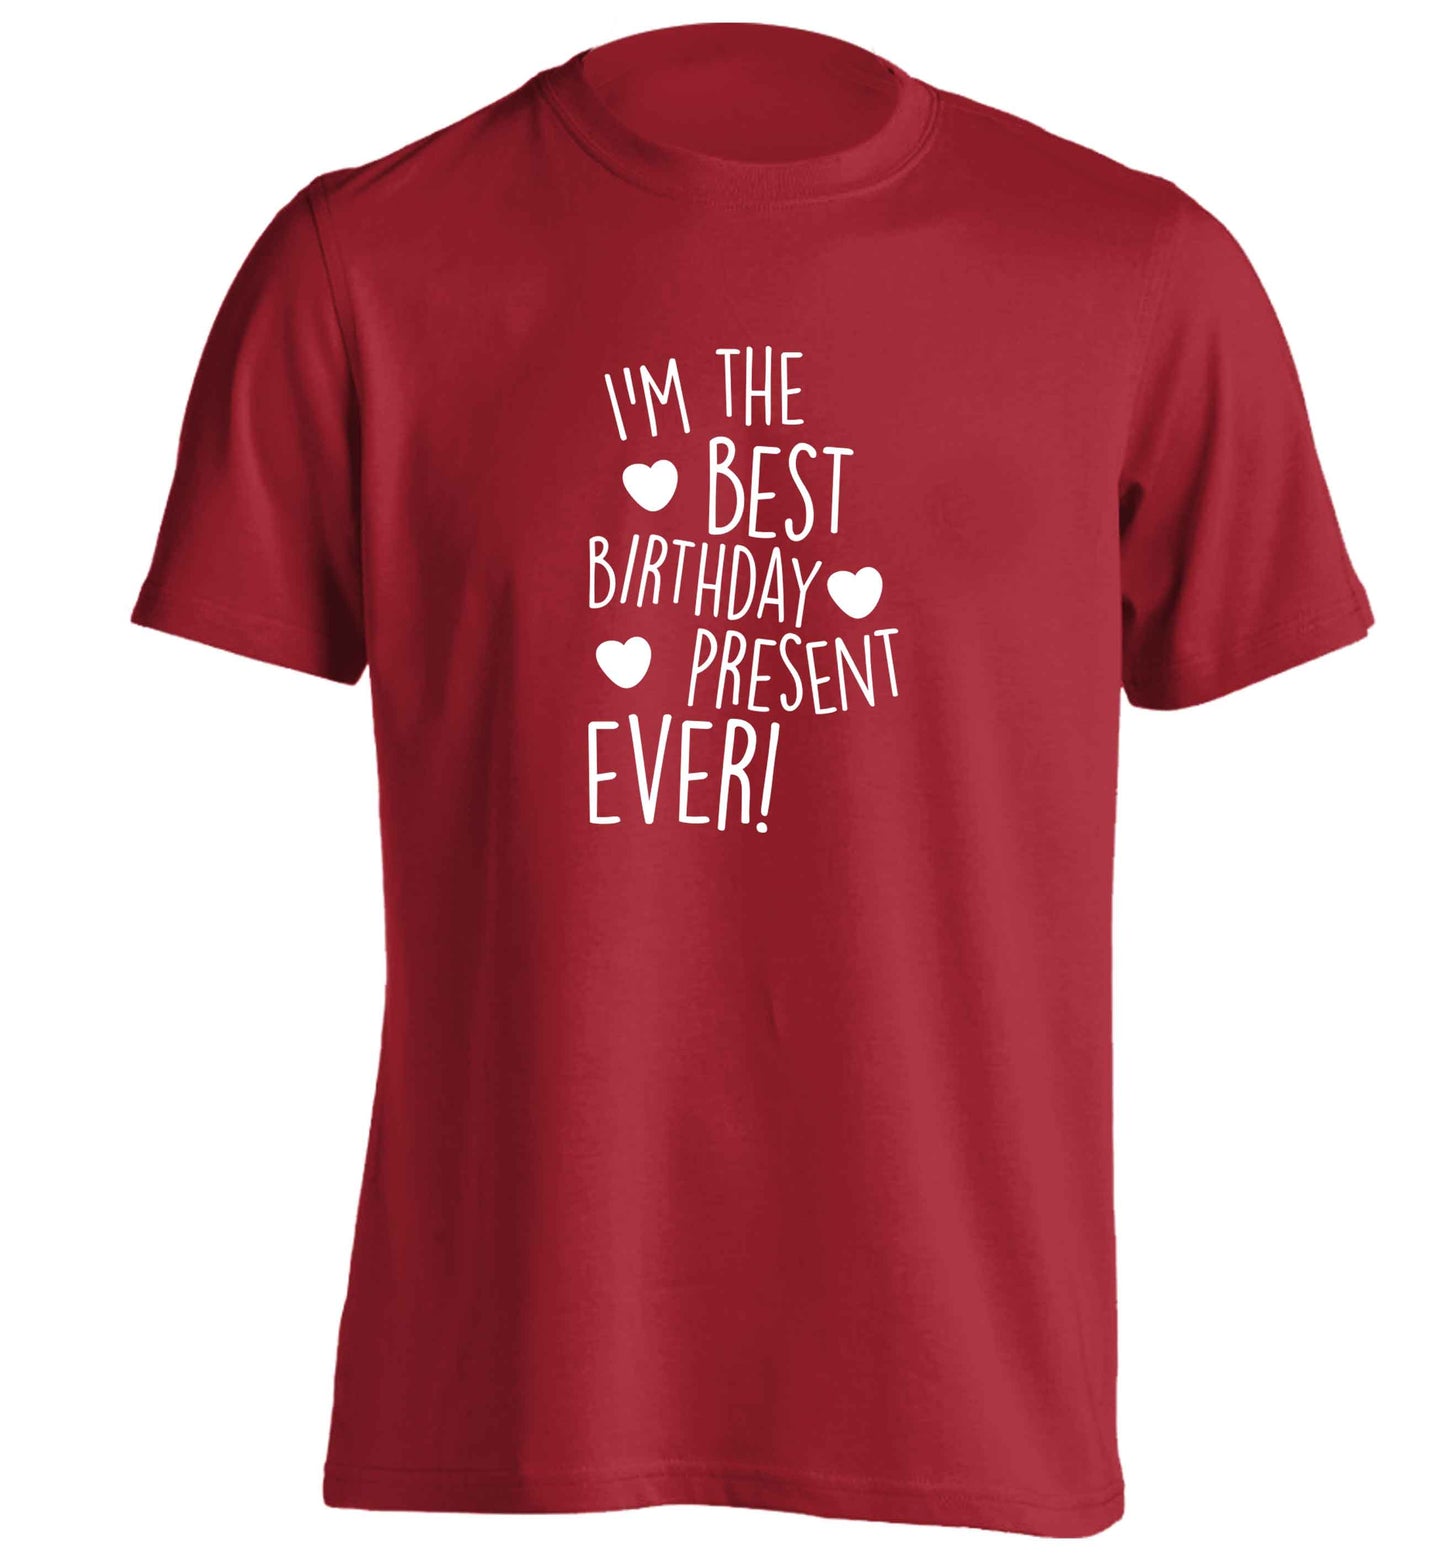 I'm the best birthday present ever adults unisex red Tshirt 2XL